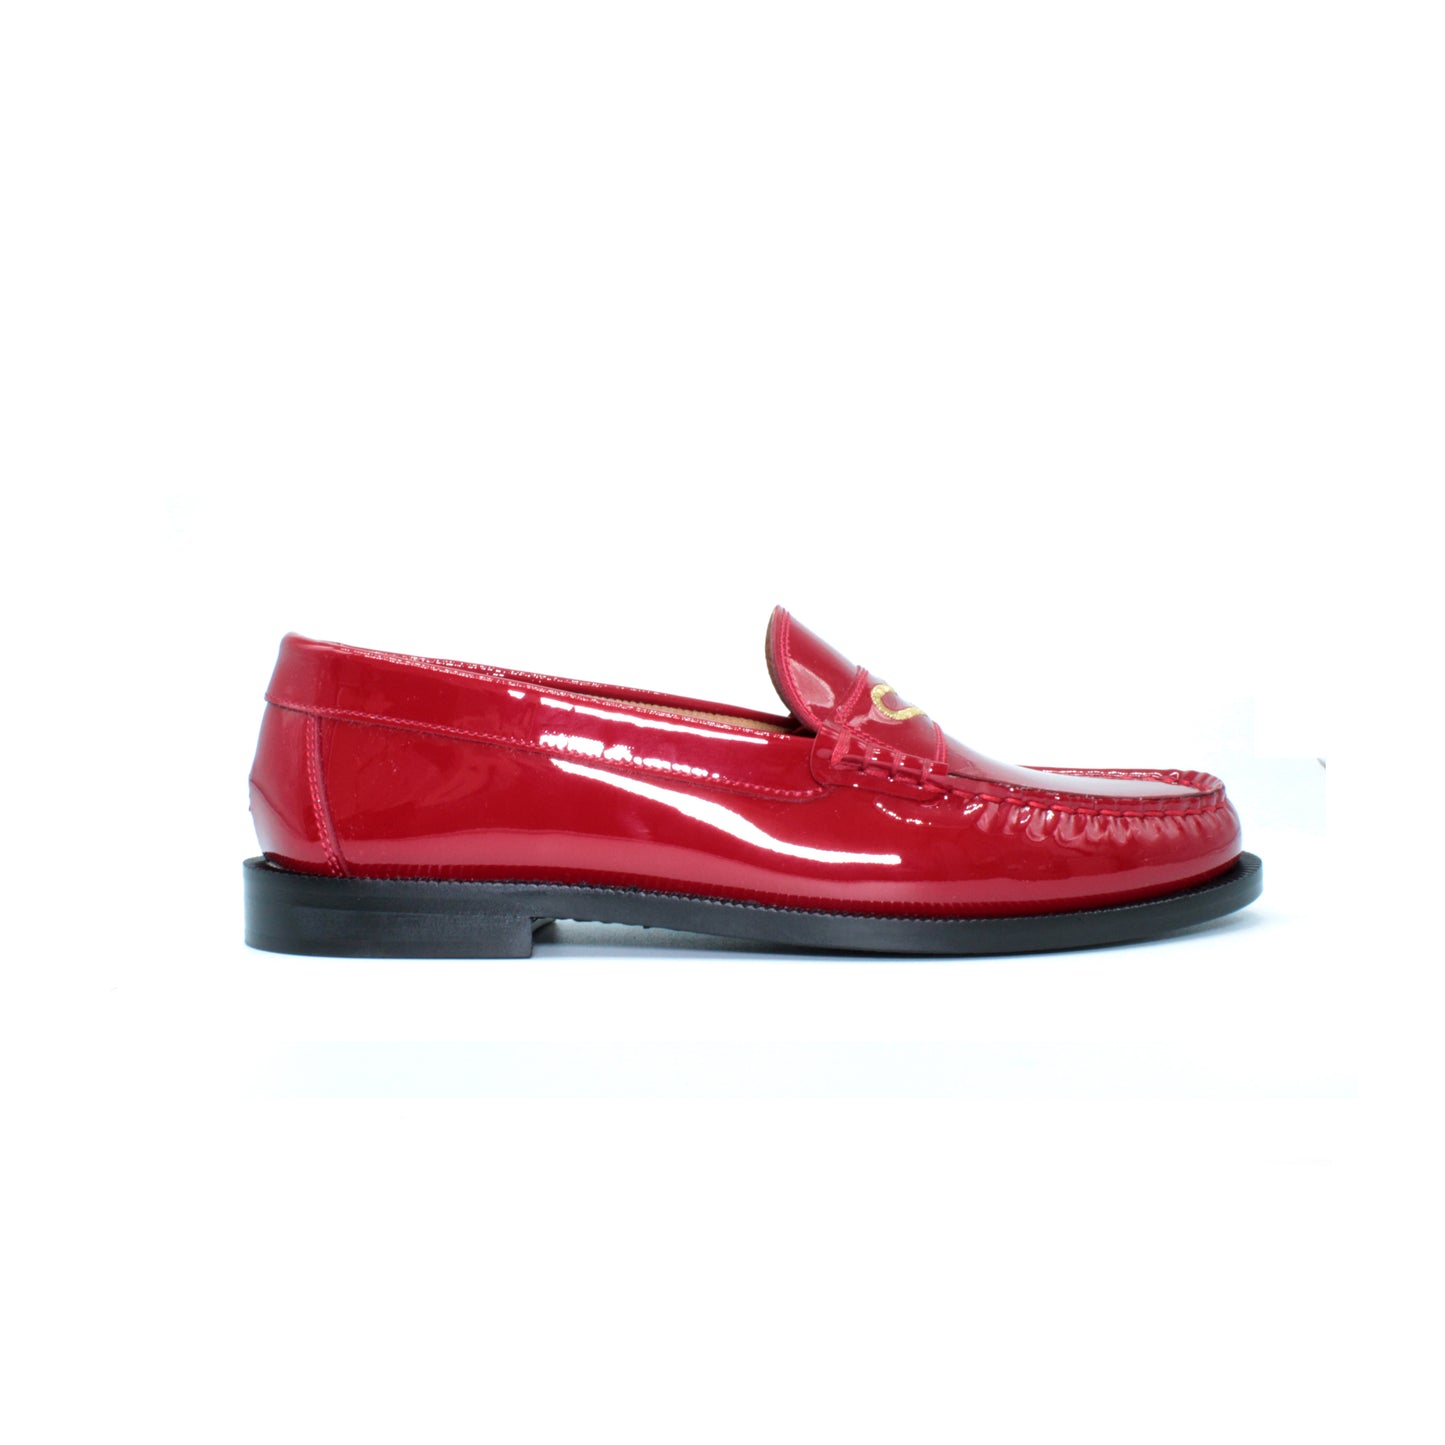 Merlot-colored patent loafer